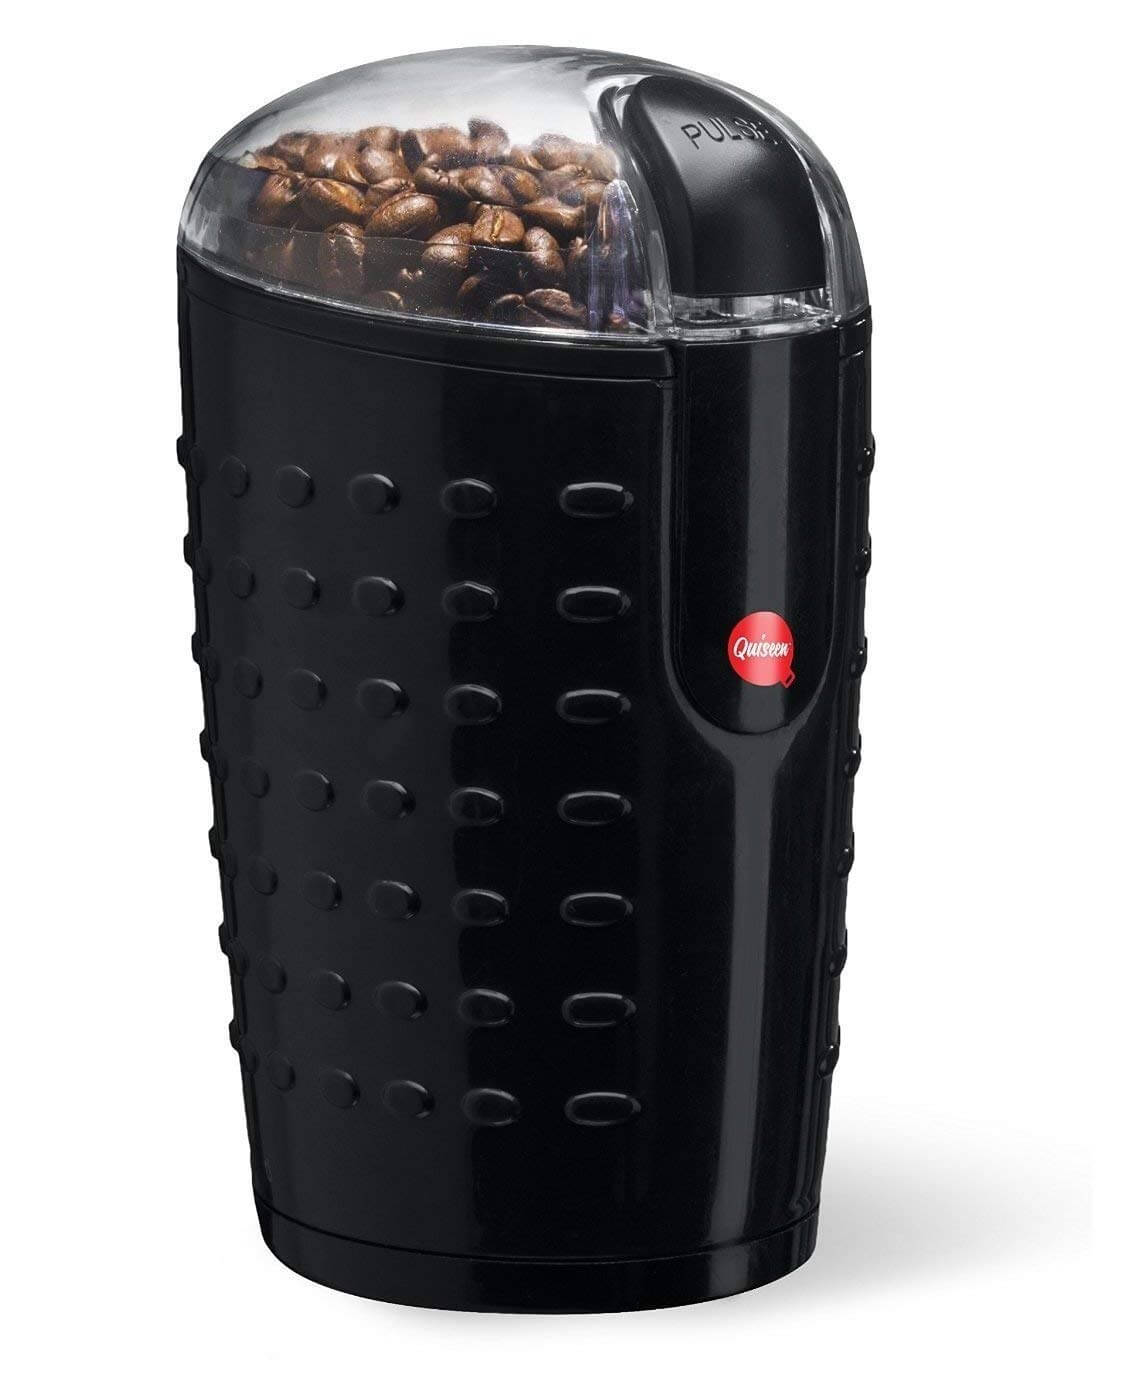 Grains-Includes a Cleaning Brush Morpilot Electric Coffee Grinder,150w Stainless Steel Blades Grinder with Coffee Bean Grinders for Spices Herbs Nuts 